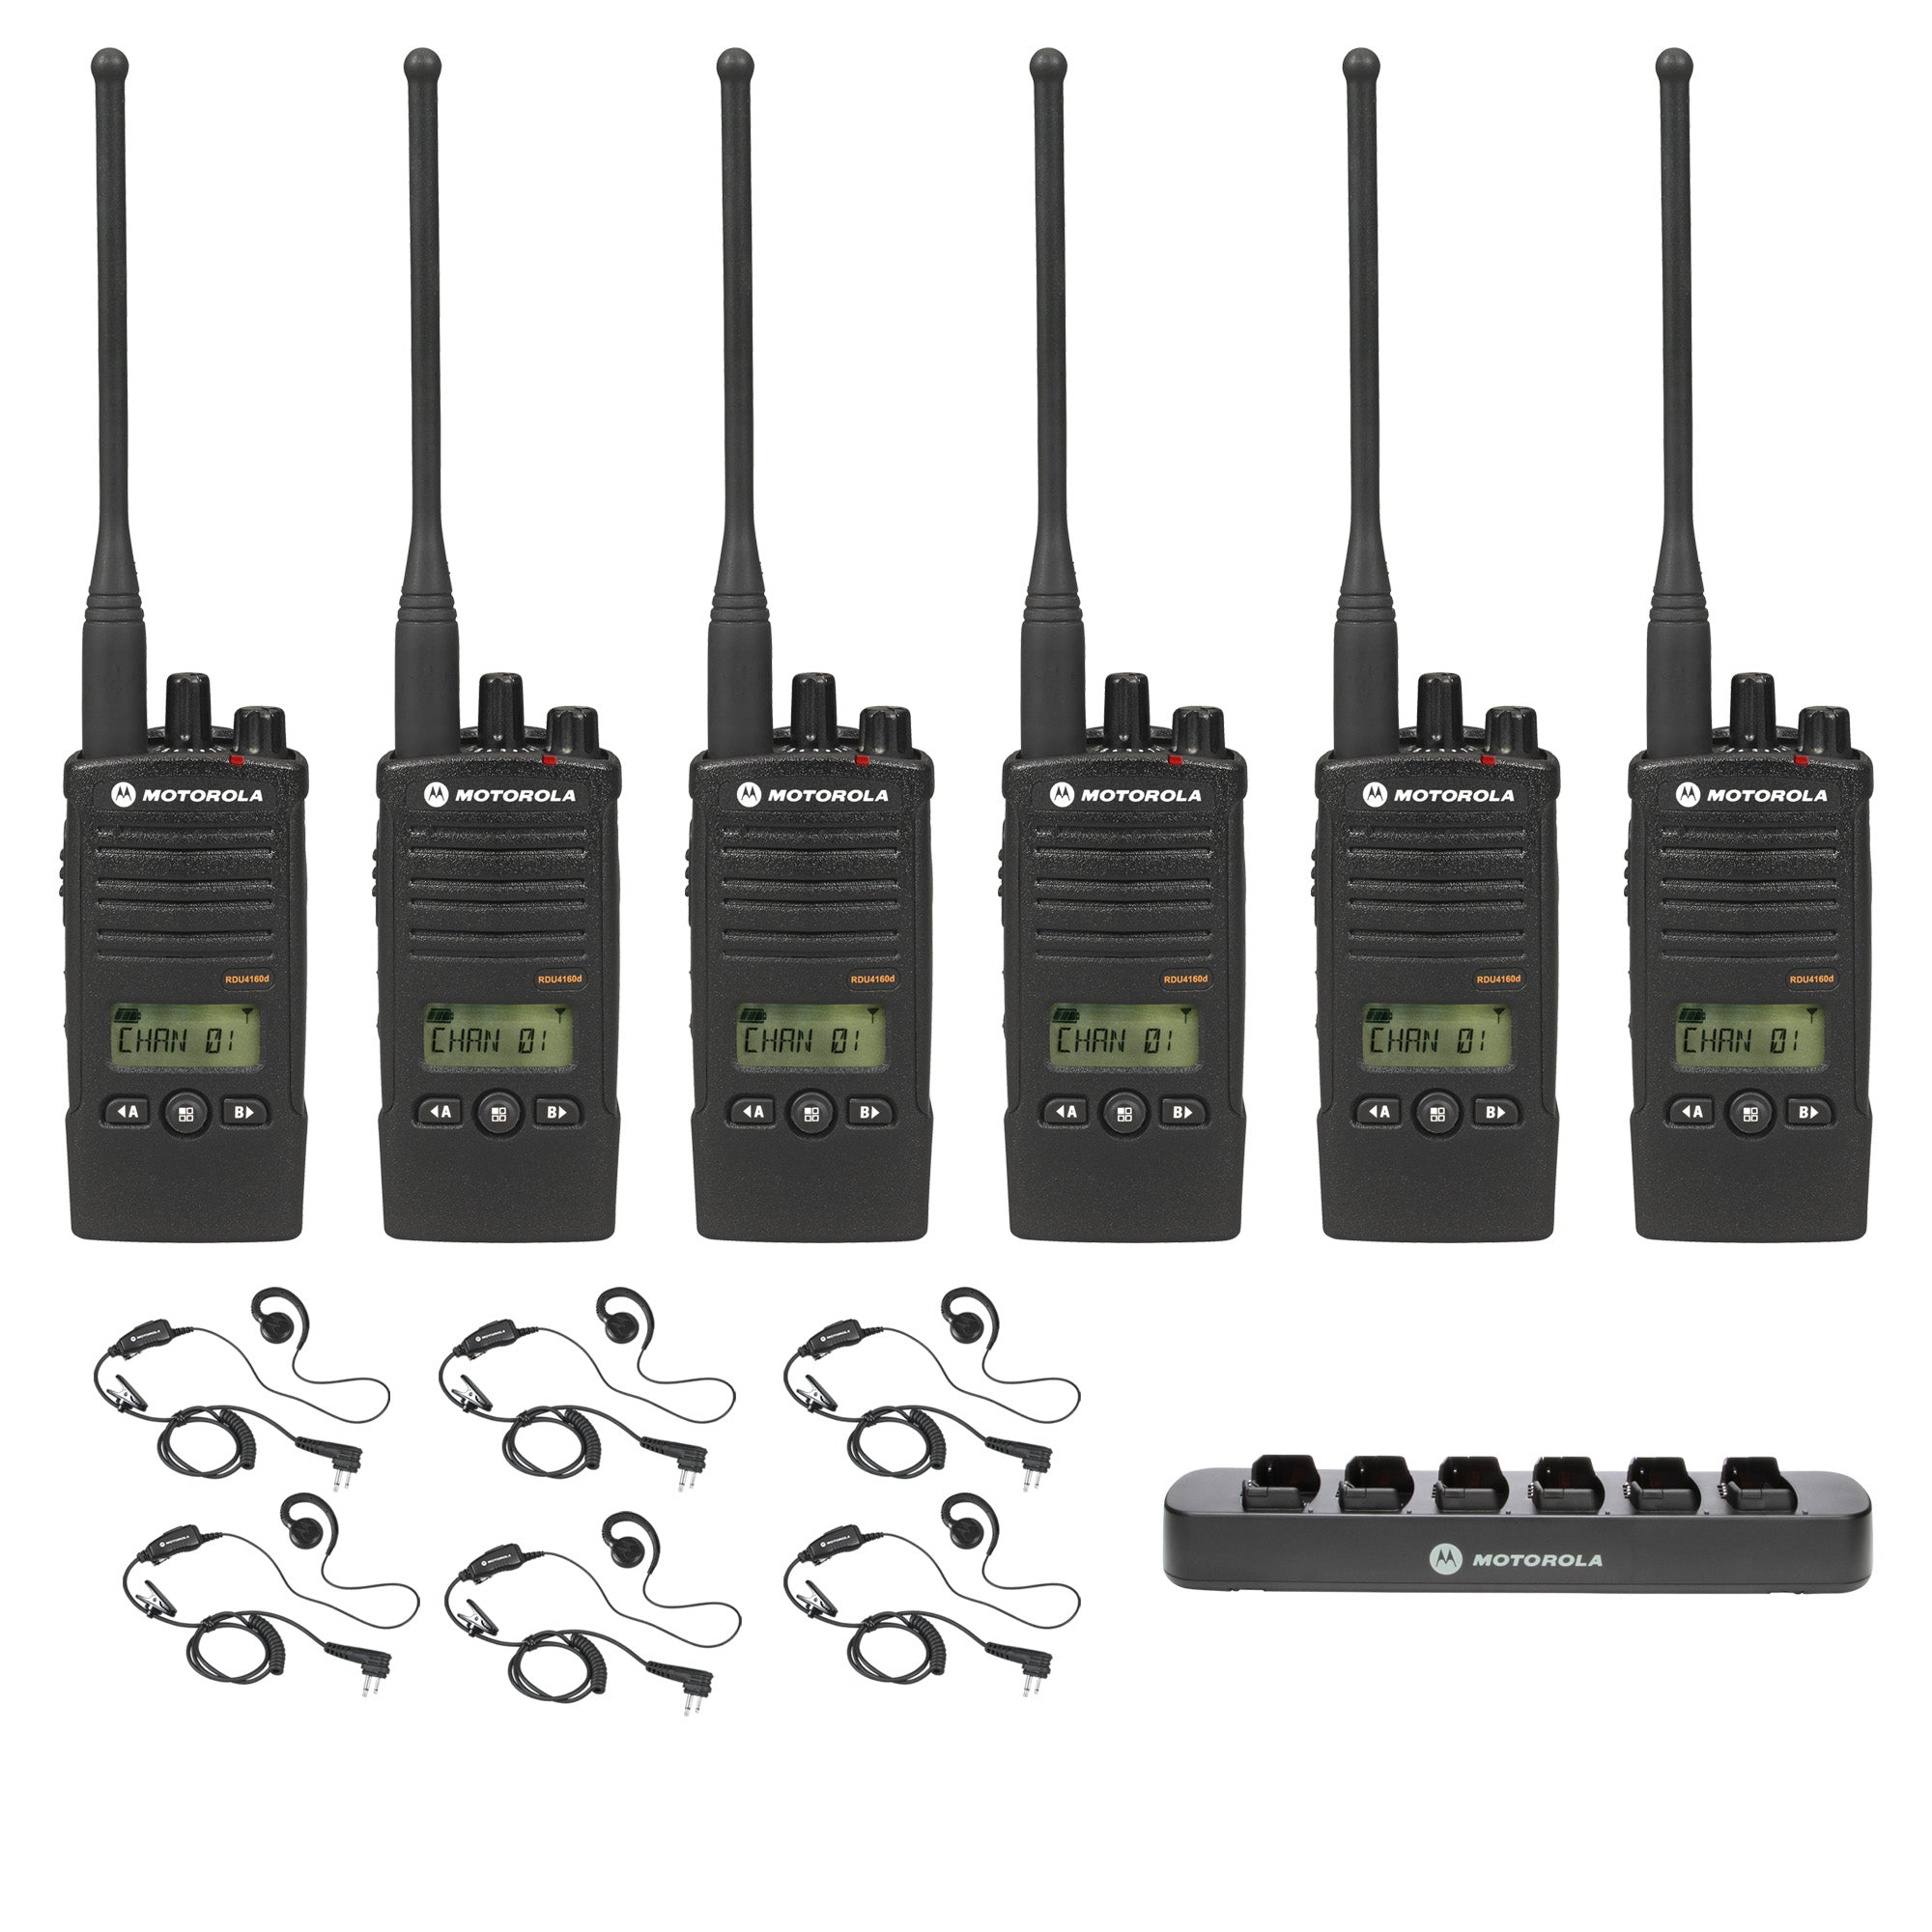 Motorola RDU4160D 6 pack with Multi Unit Charger and headsets